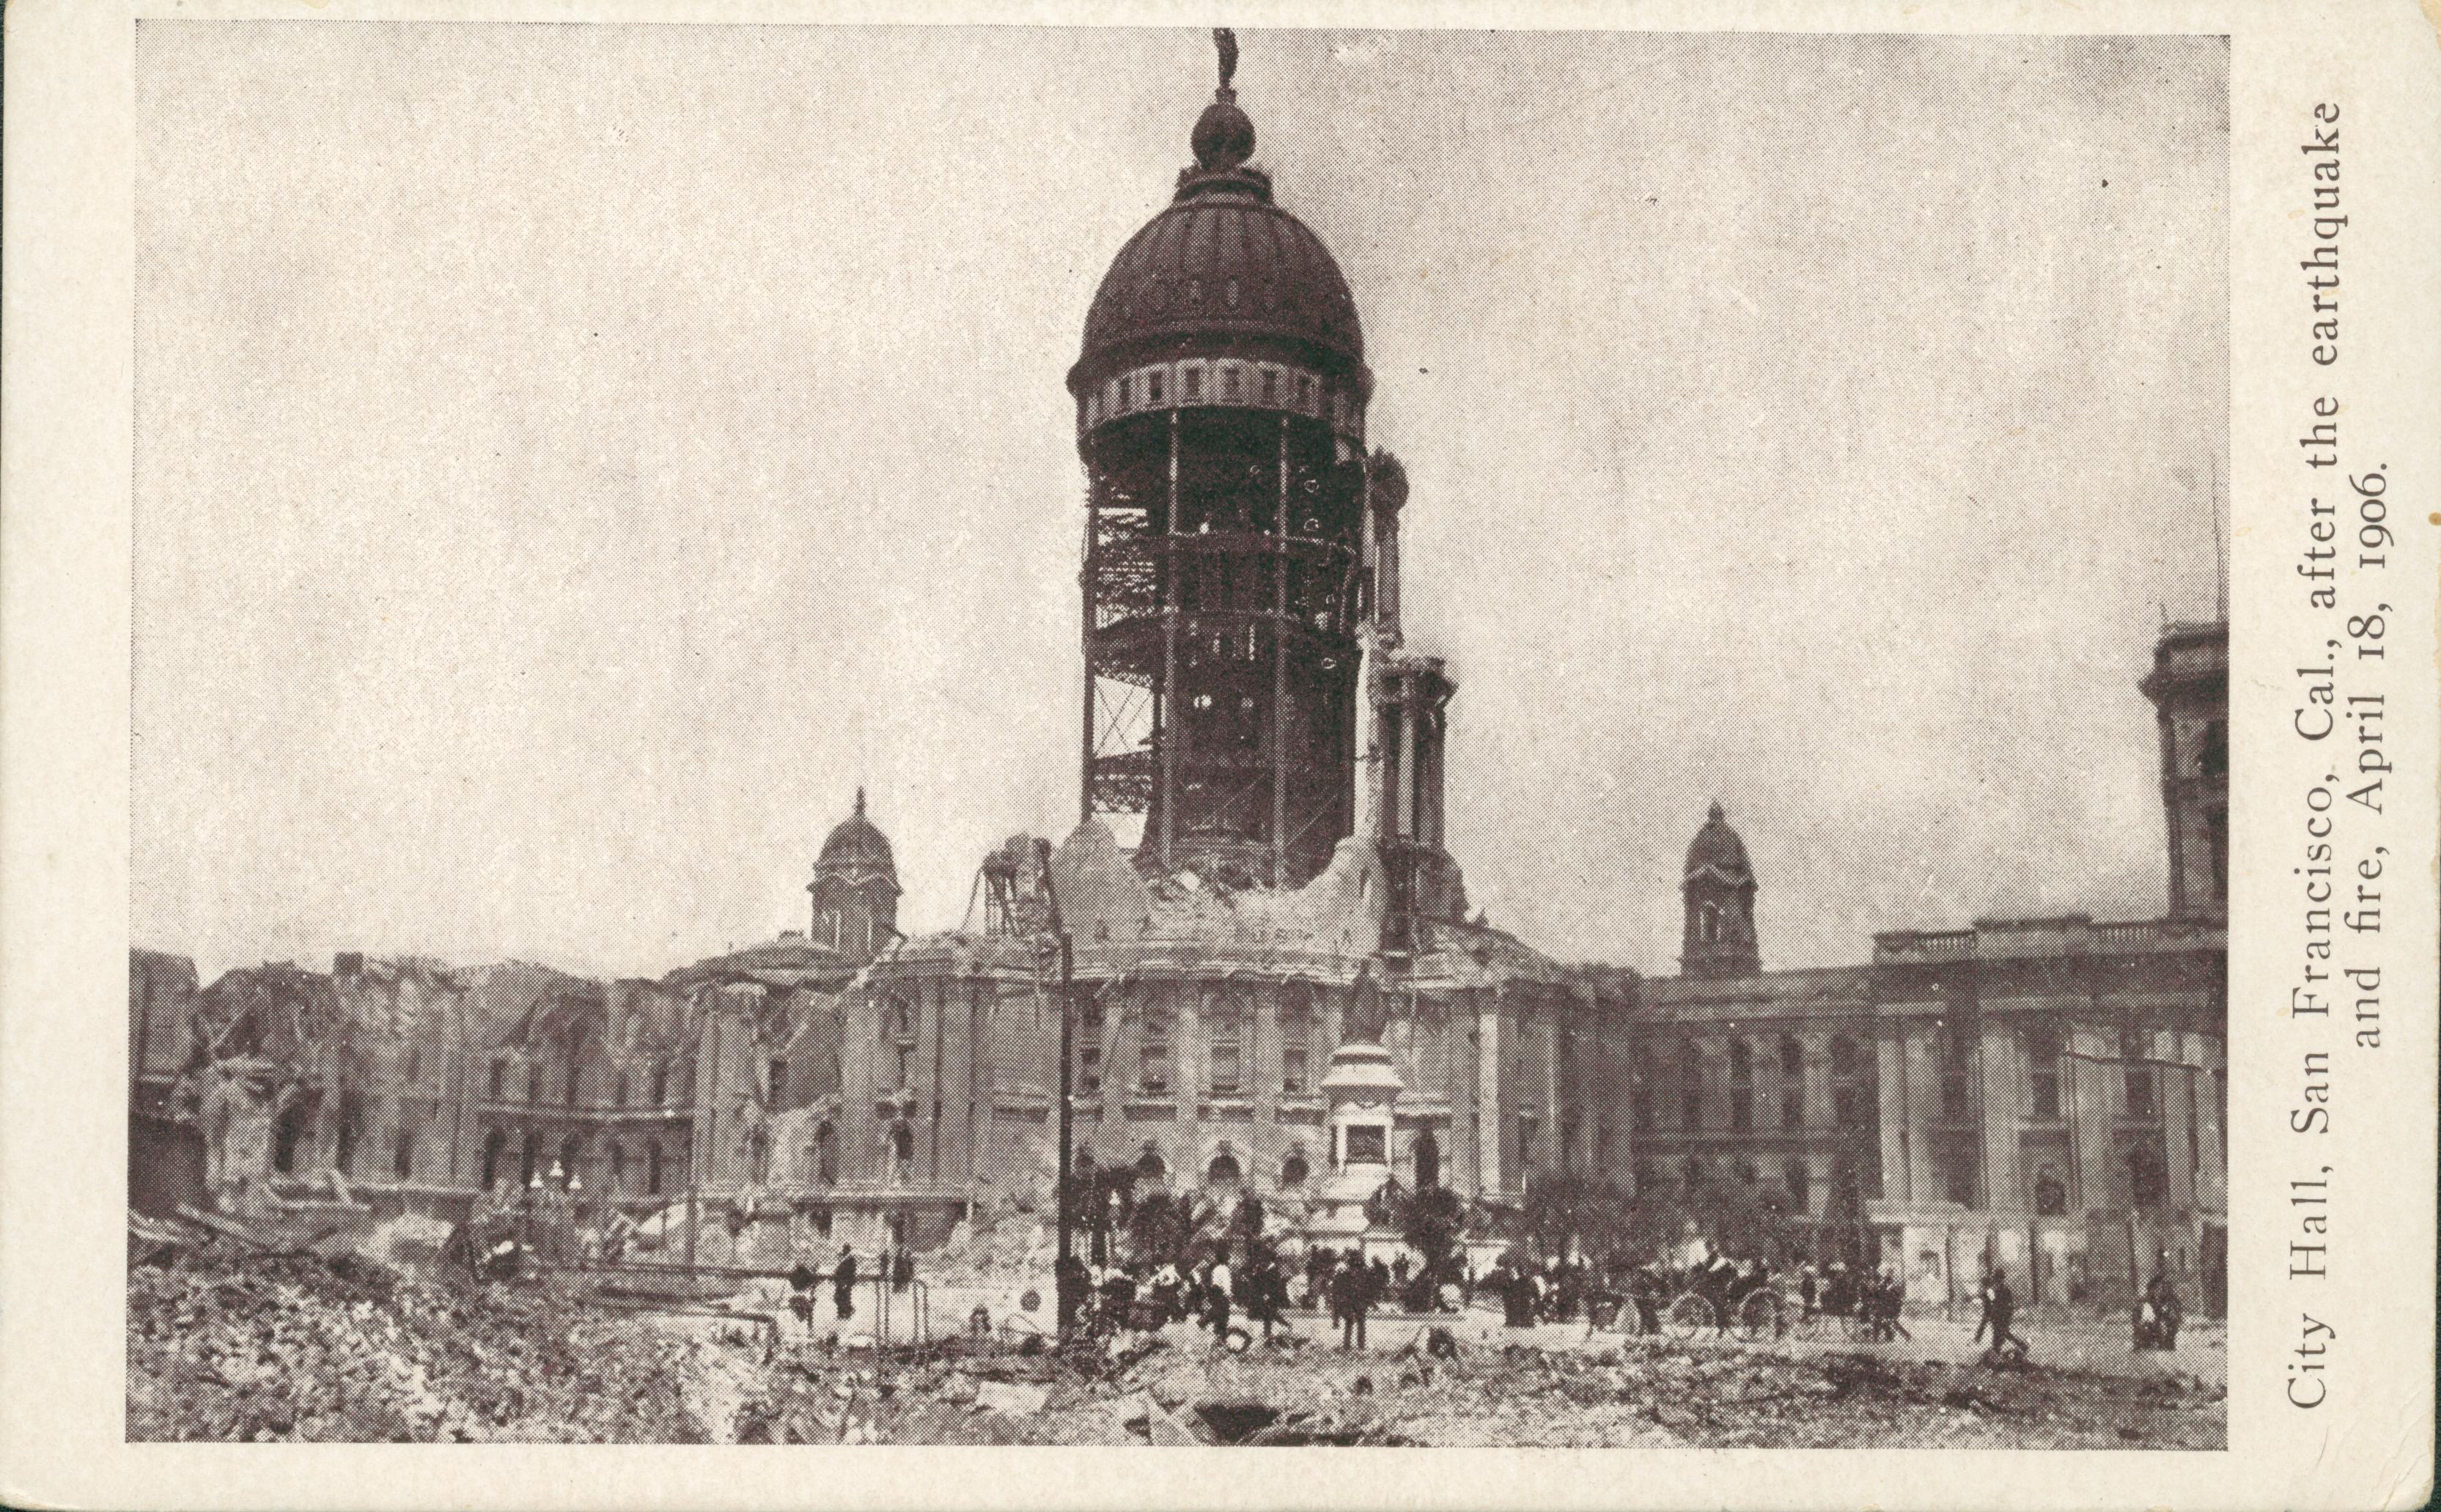 Photo showing the destruction of City Hall surrounded by rubble.